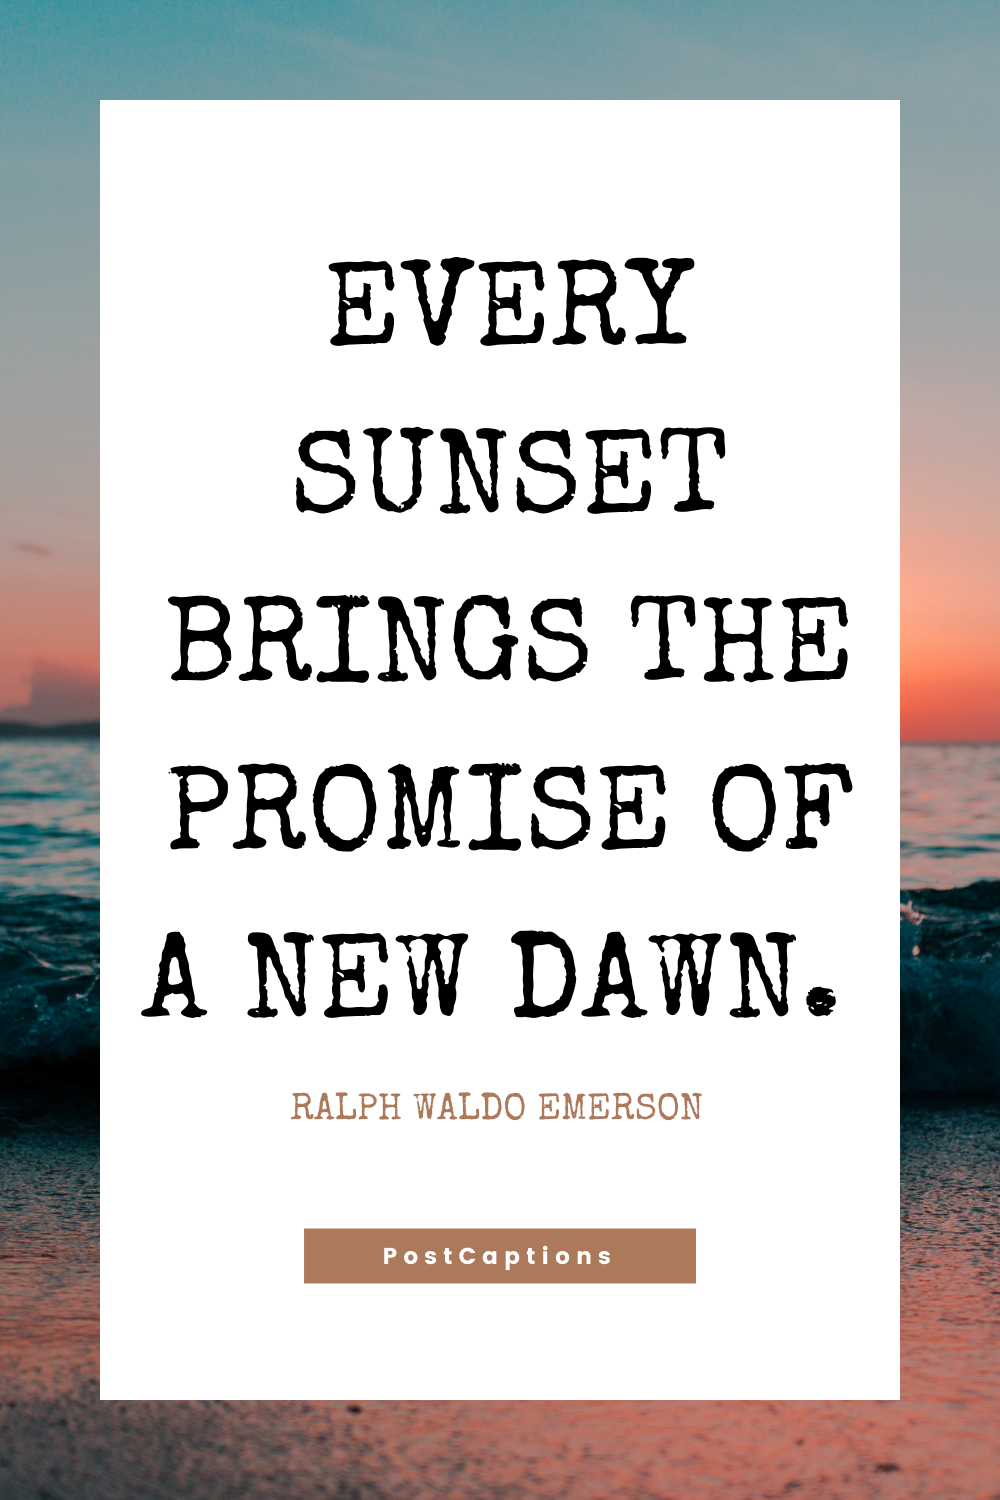 Best Sunset Quotes for Instagram